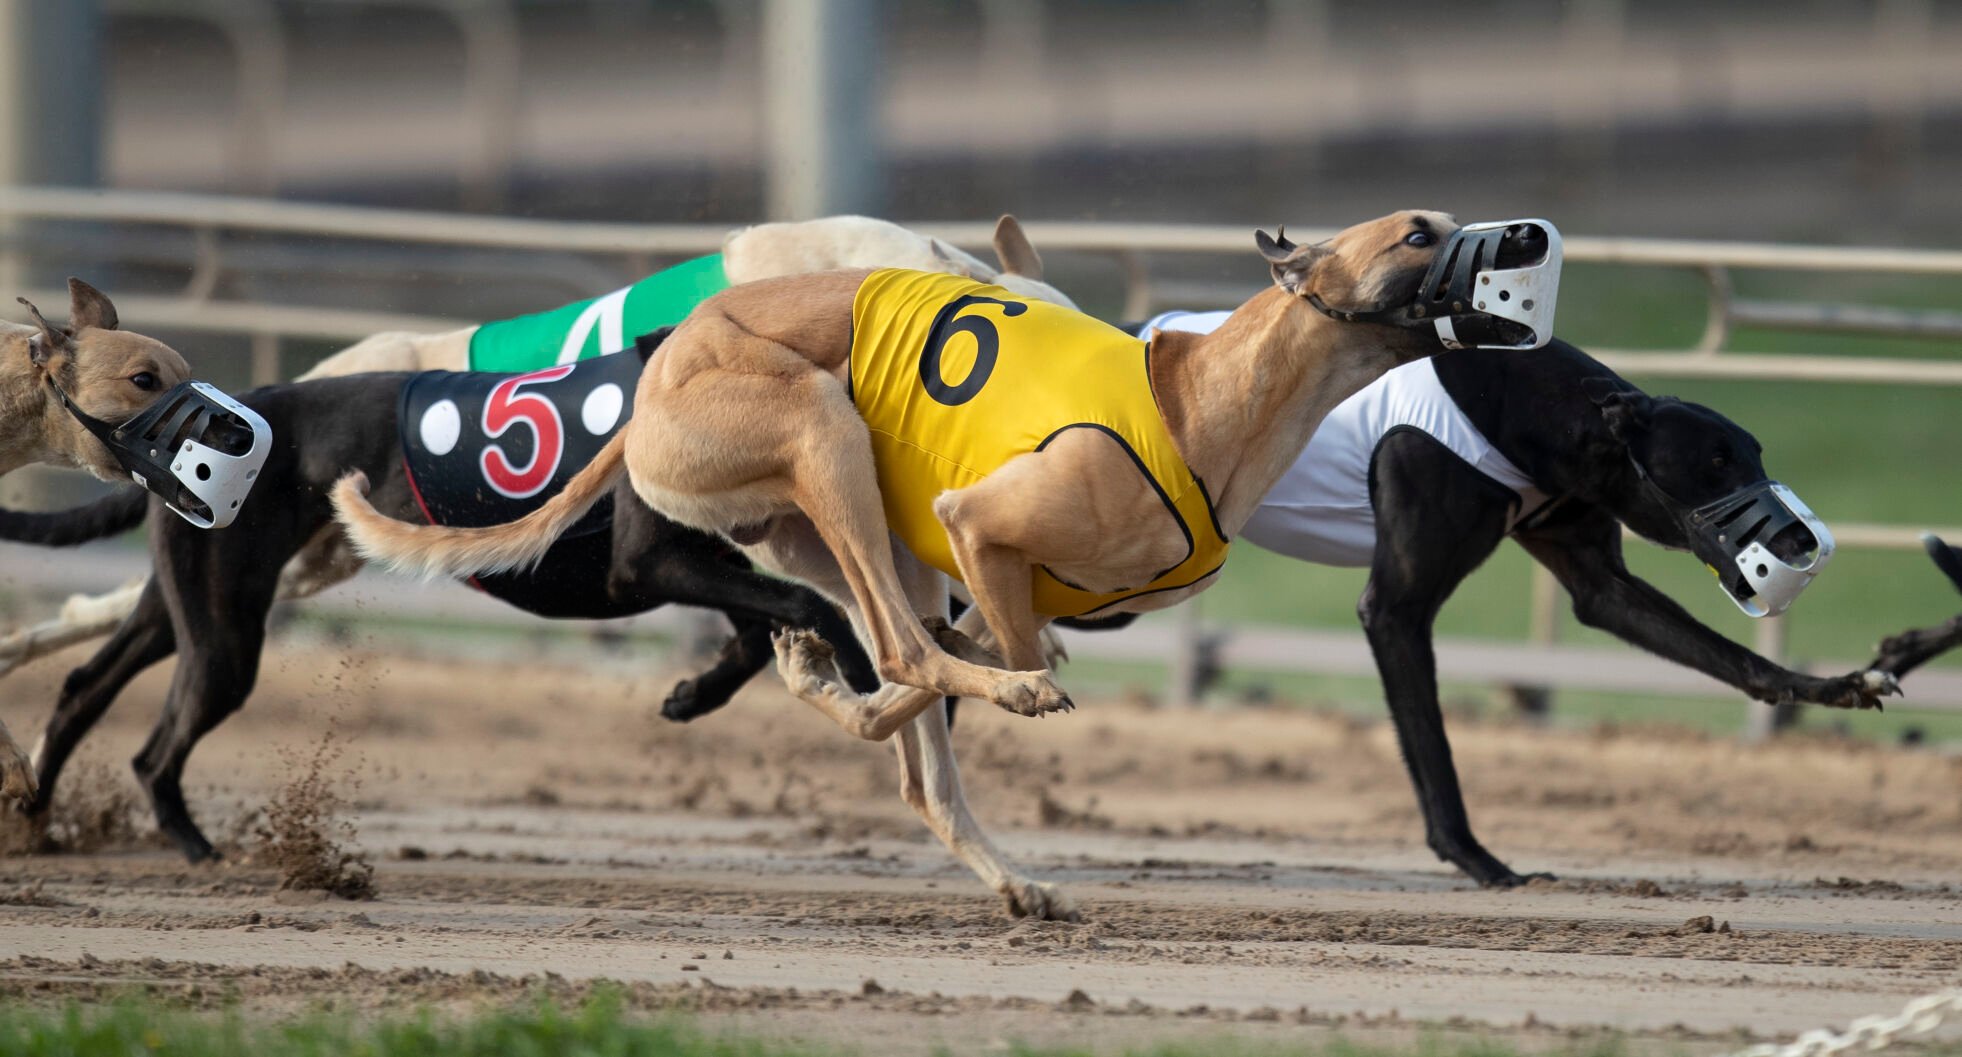 Greyhounds race at Iowa Greyhound Park in Dubuque on Thursday, April 28, 2022.    PHOTO CREDIT: Stephen Gassman